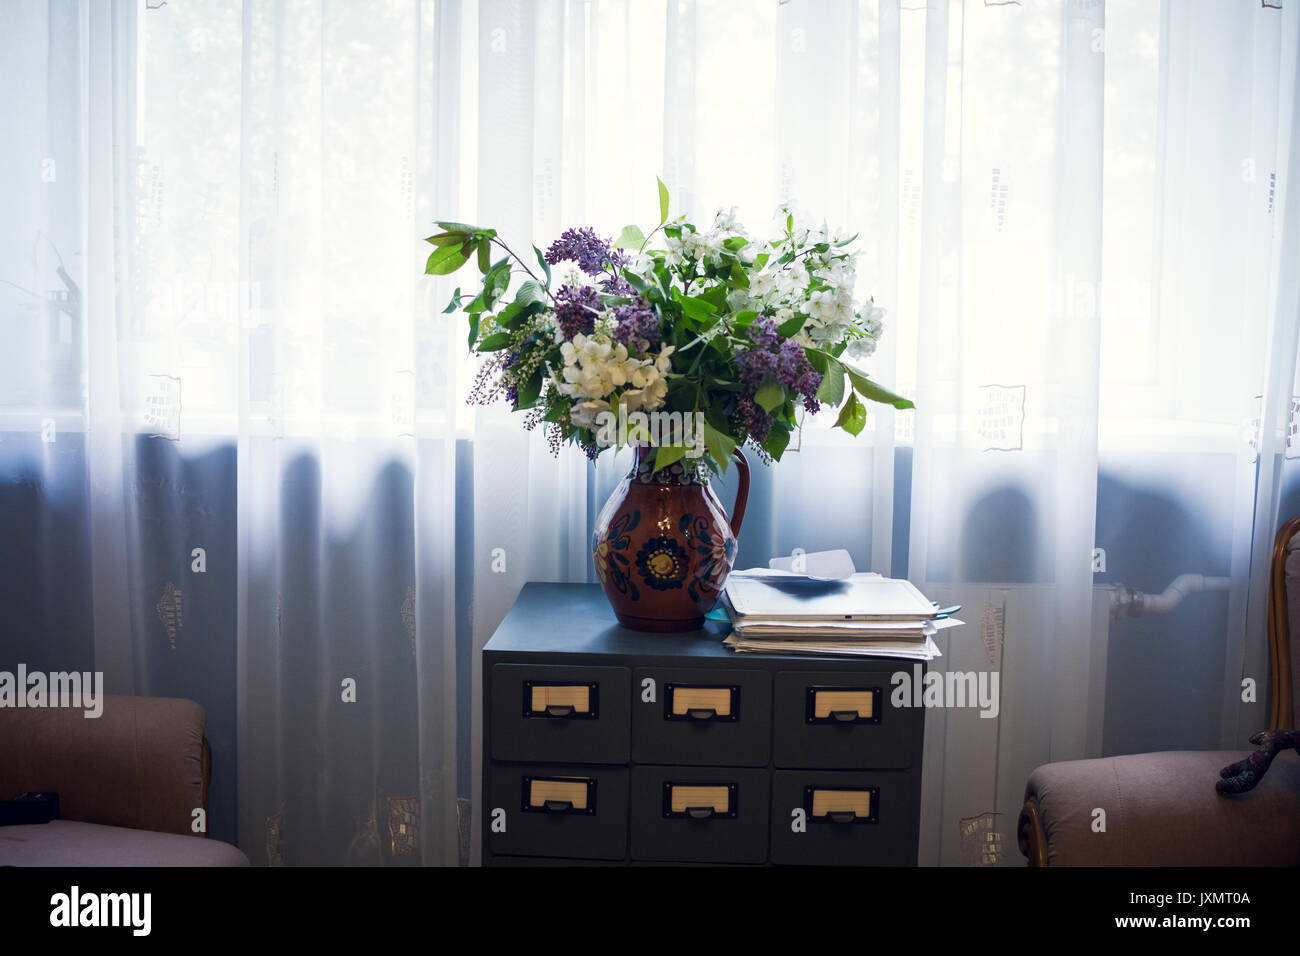 Vase of flowers on drawers in front of window Stock Photo